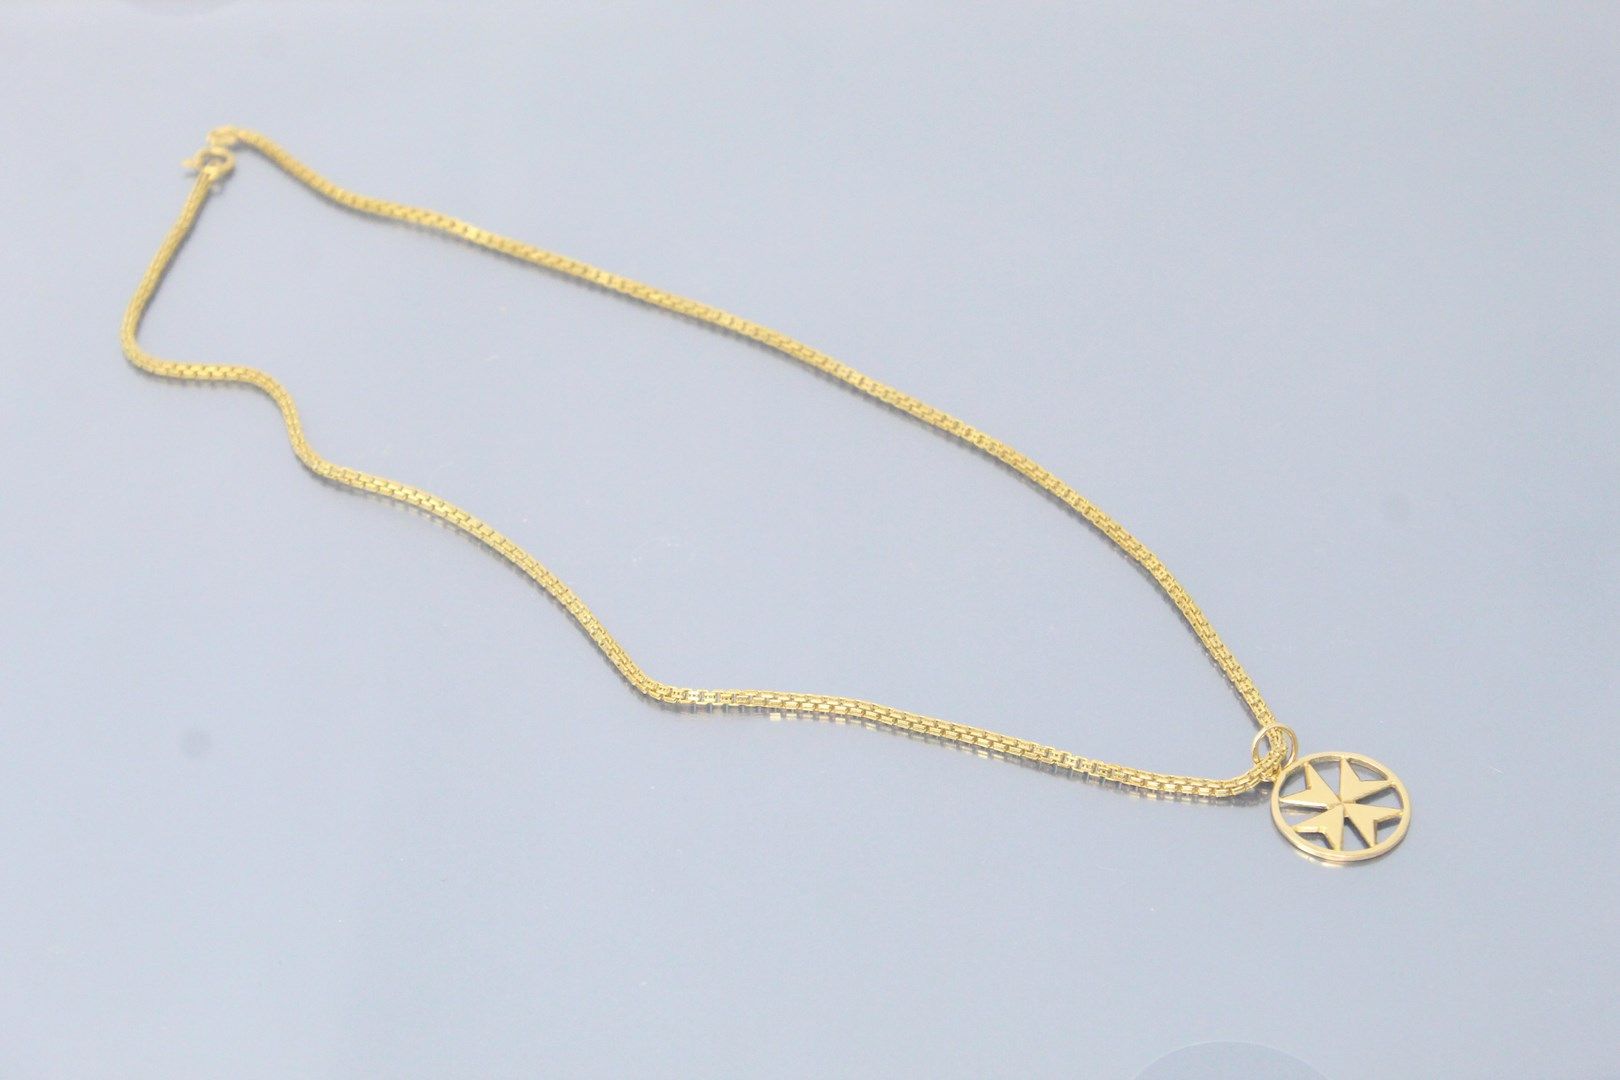 Null Chain and pendant in 18k (750) yellow gold. 

Gross weight: 13.26 g.